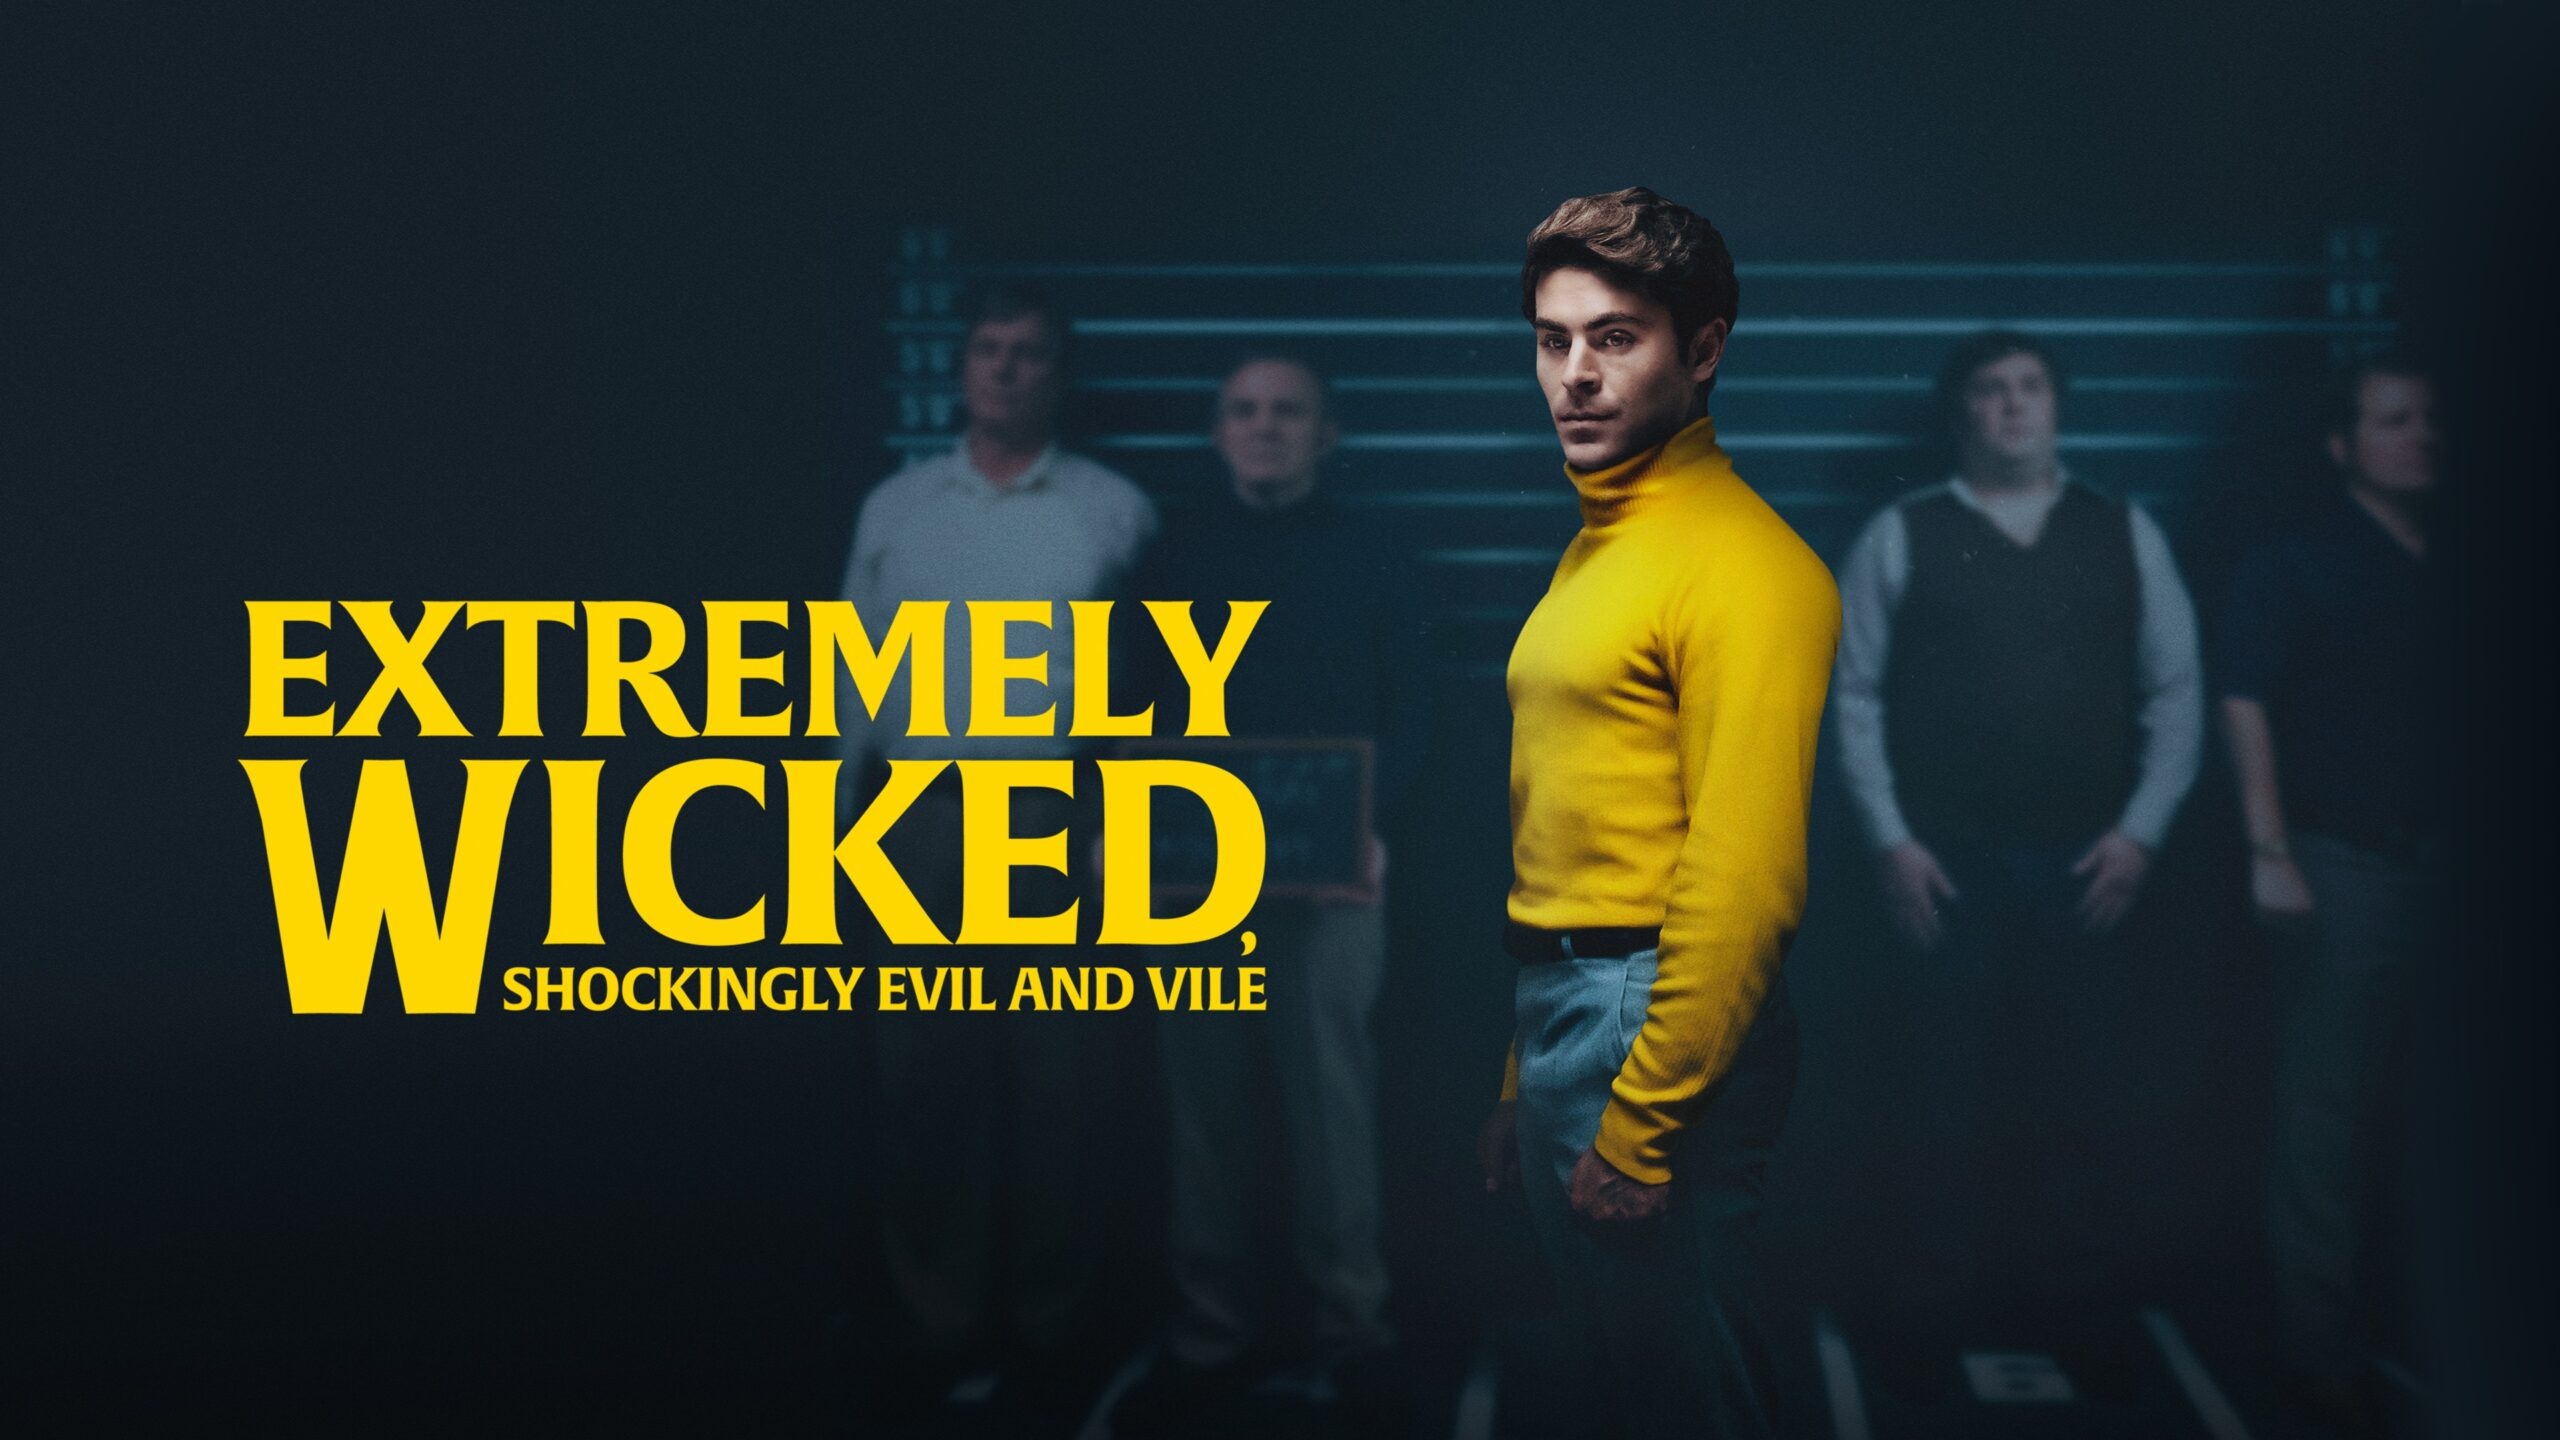 Extremely Wicked, Shockingly Evil and Vile, Jumpcut online review, Zac Efron movie, Psychological thriller, 2560x1440 HD Desktop